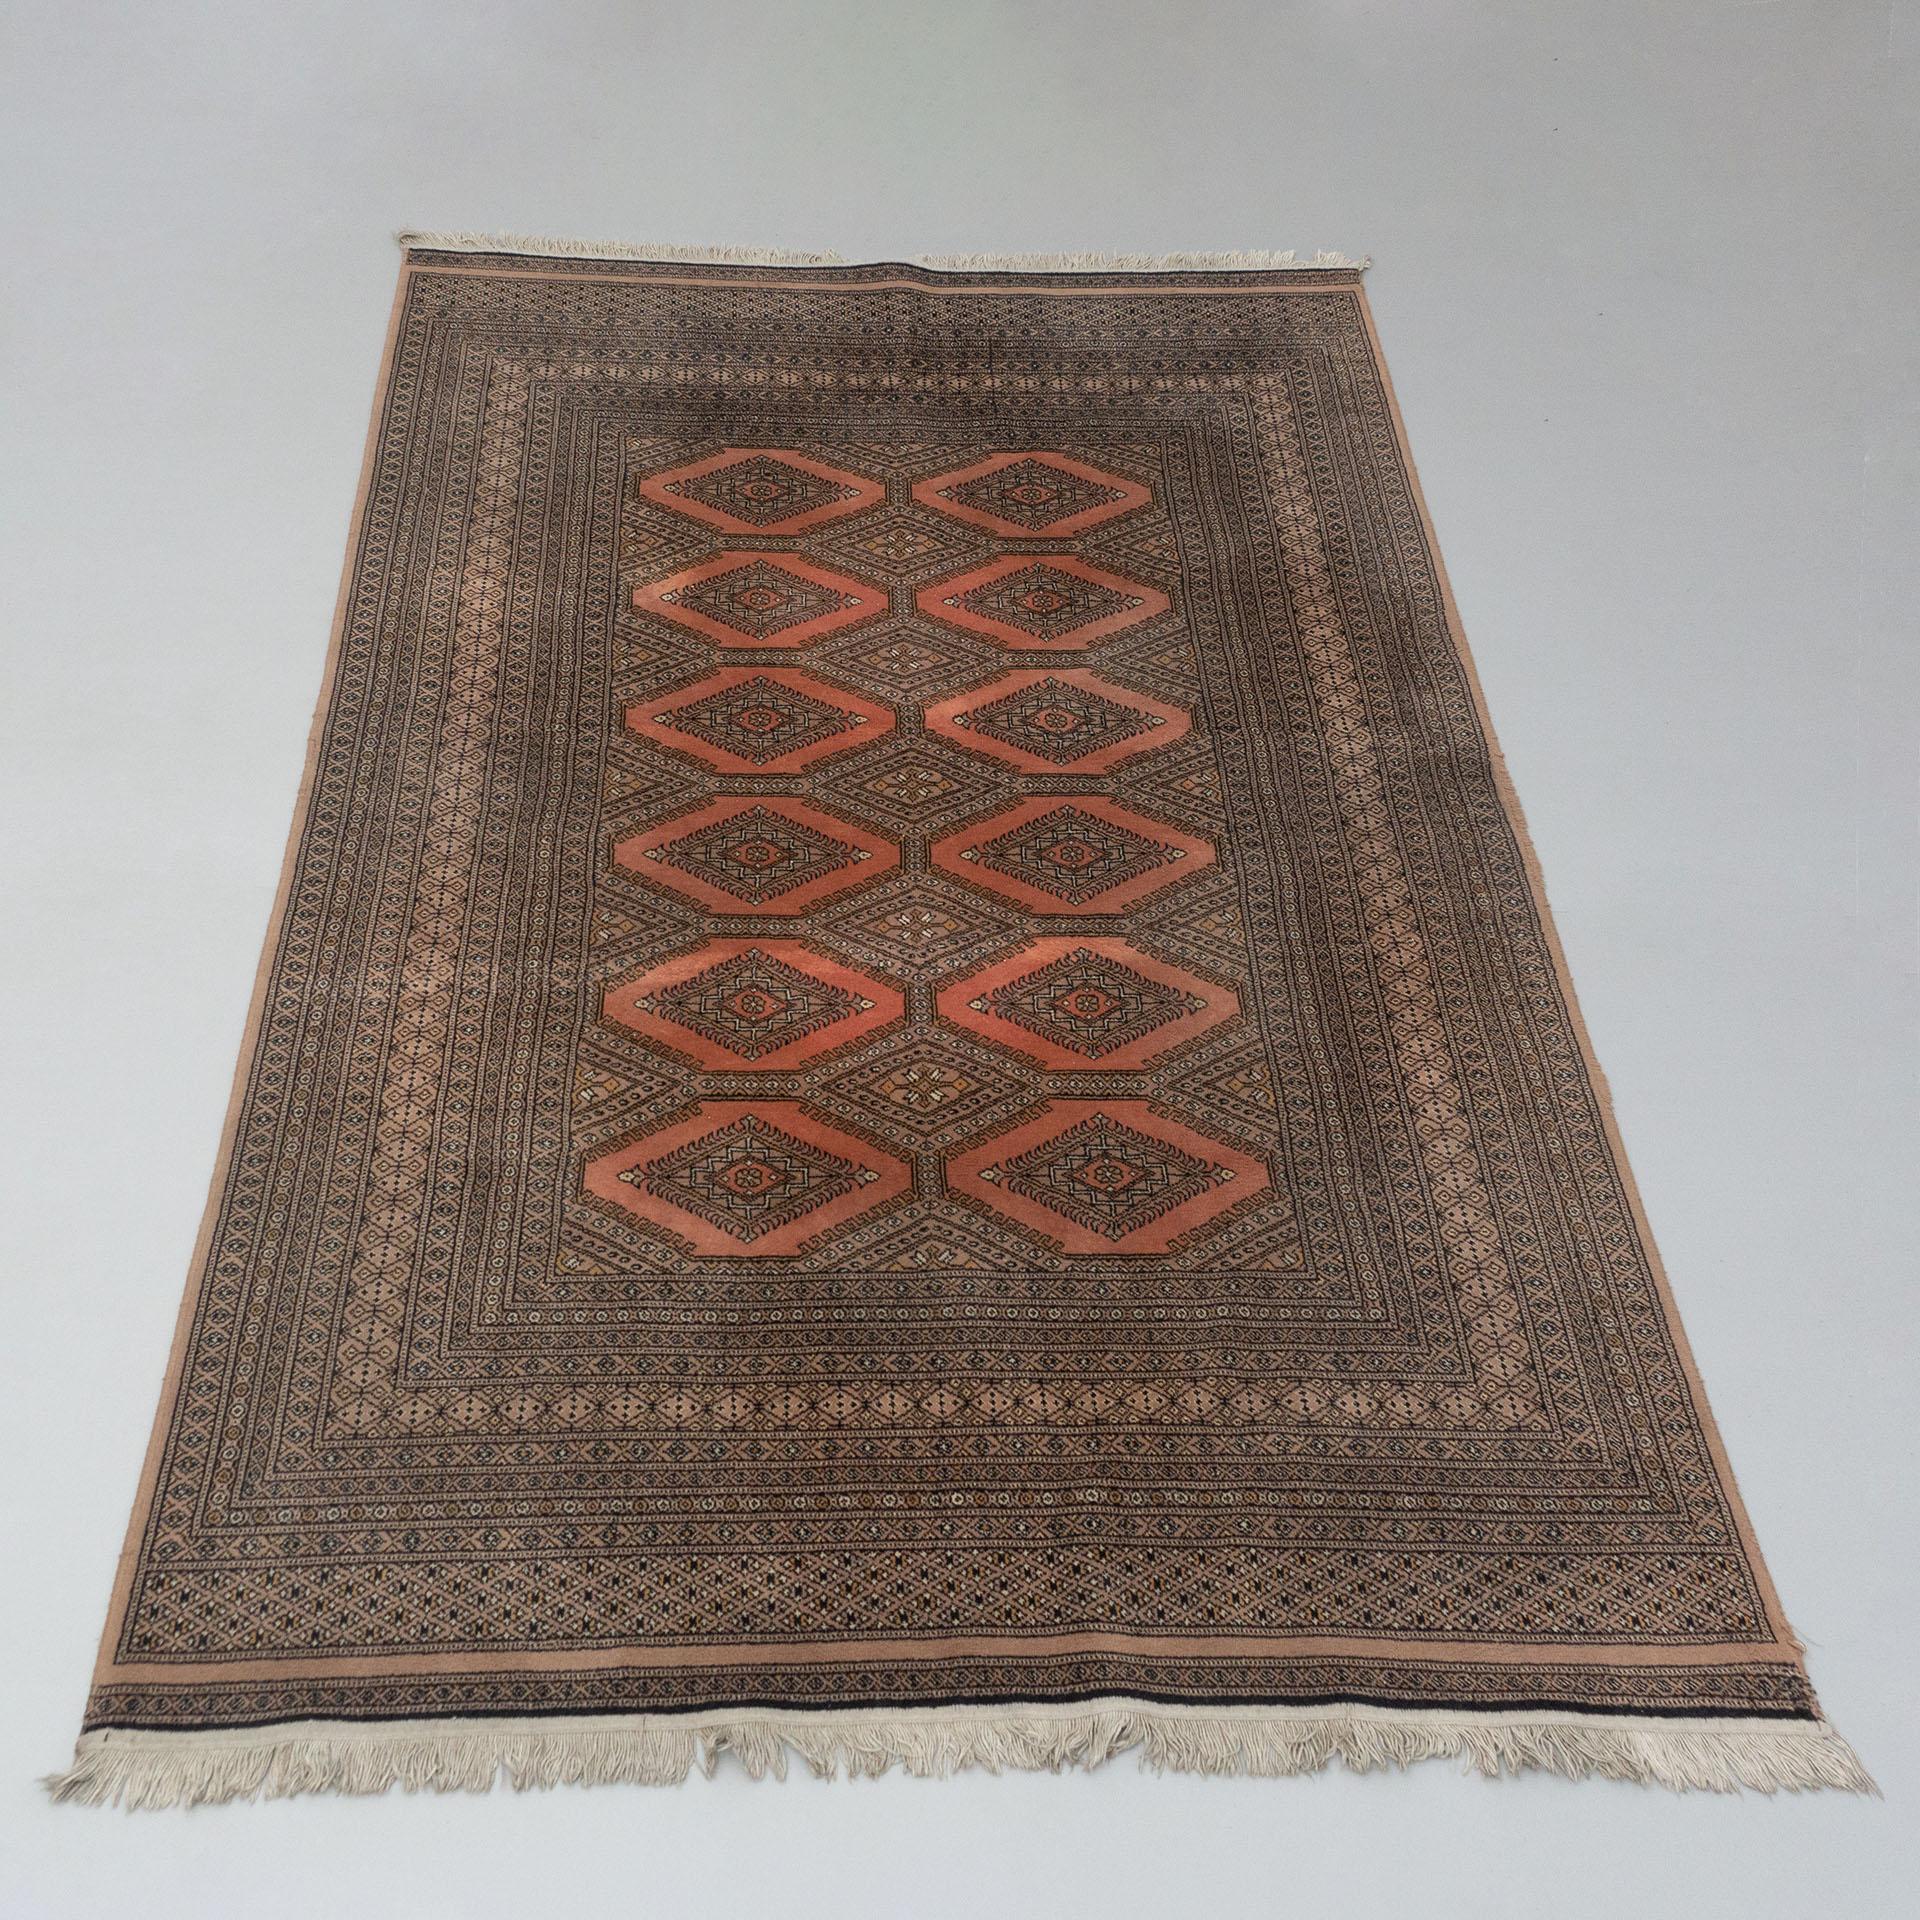 Wool rug by unknown manufacturer from Spain, circa 1940.

In original condition, with minor wear consistent with age and use, preserving a beautiful patina.

Material:
Wool

Dimensions:
D 0.8 cm x W 130 cm x H 200 cm